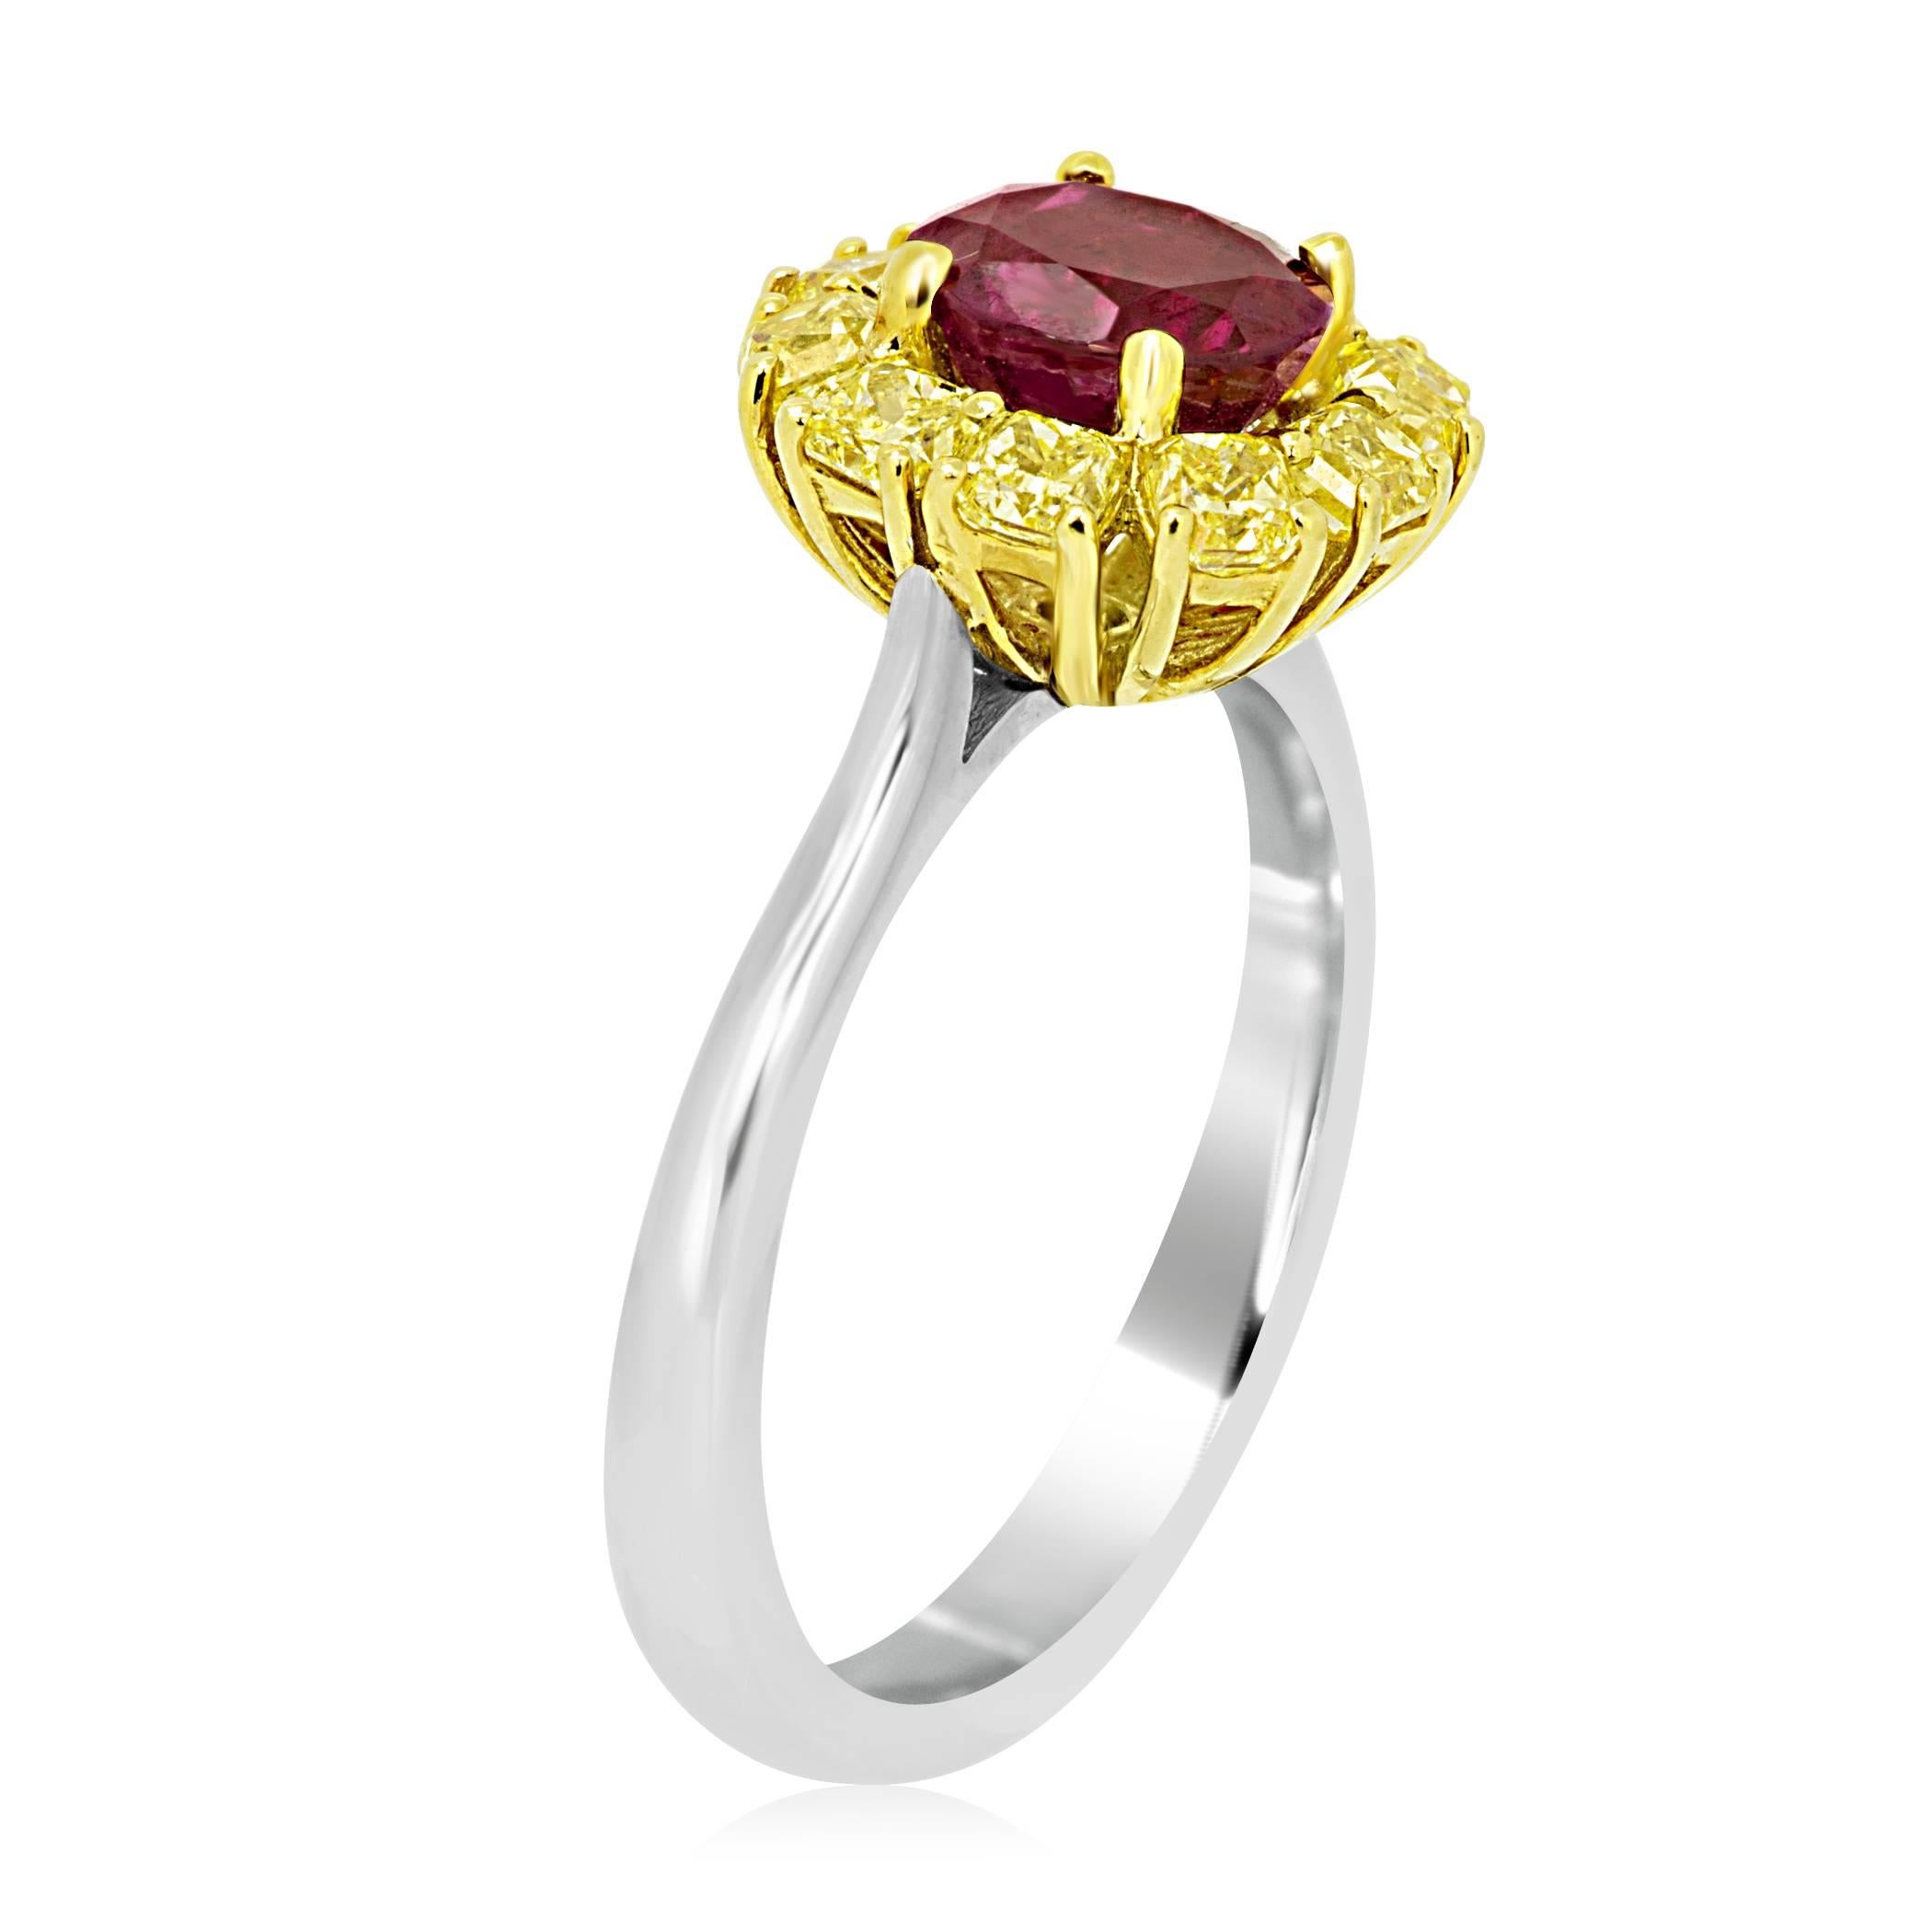 Contemporary No Heat 1.60 Carat GIA Certified Ruby Diamond Two Color Gold Bridal CocktailRing